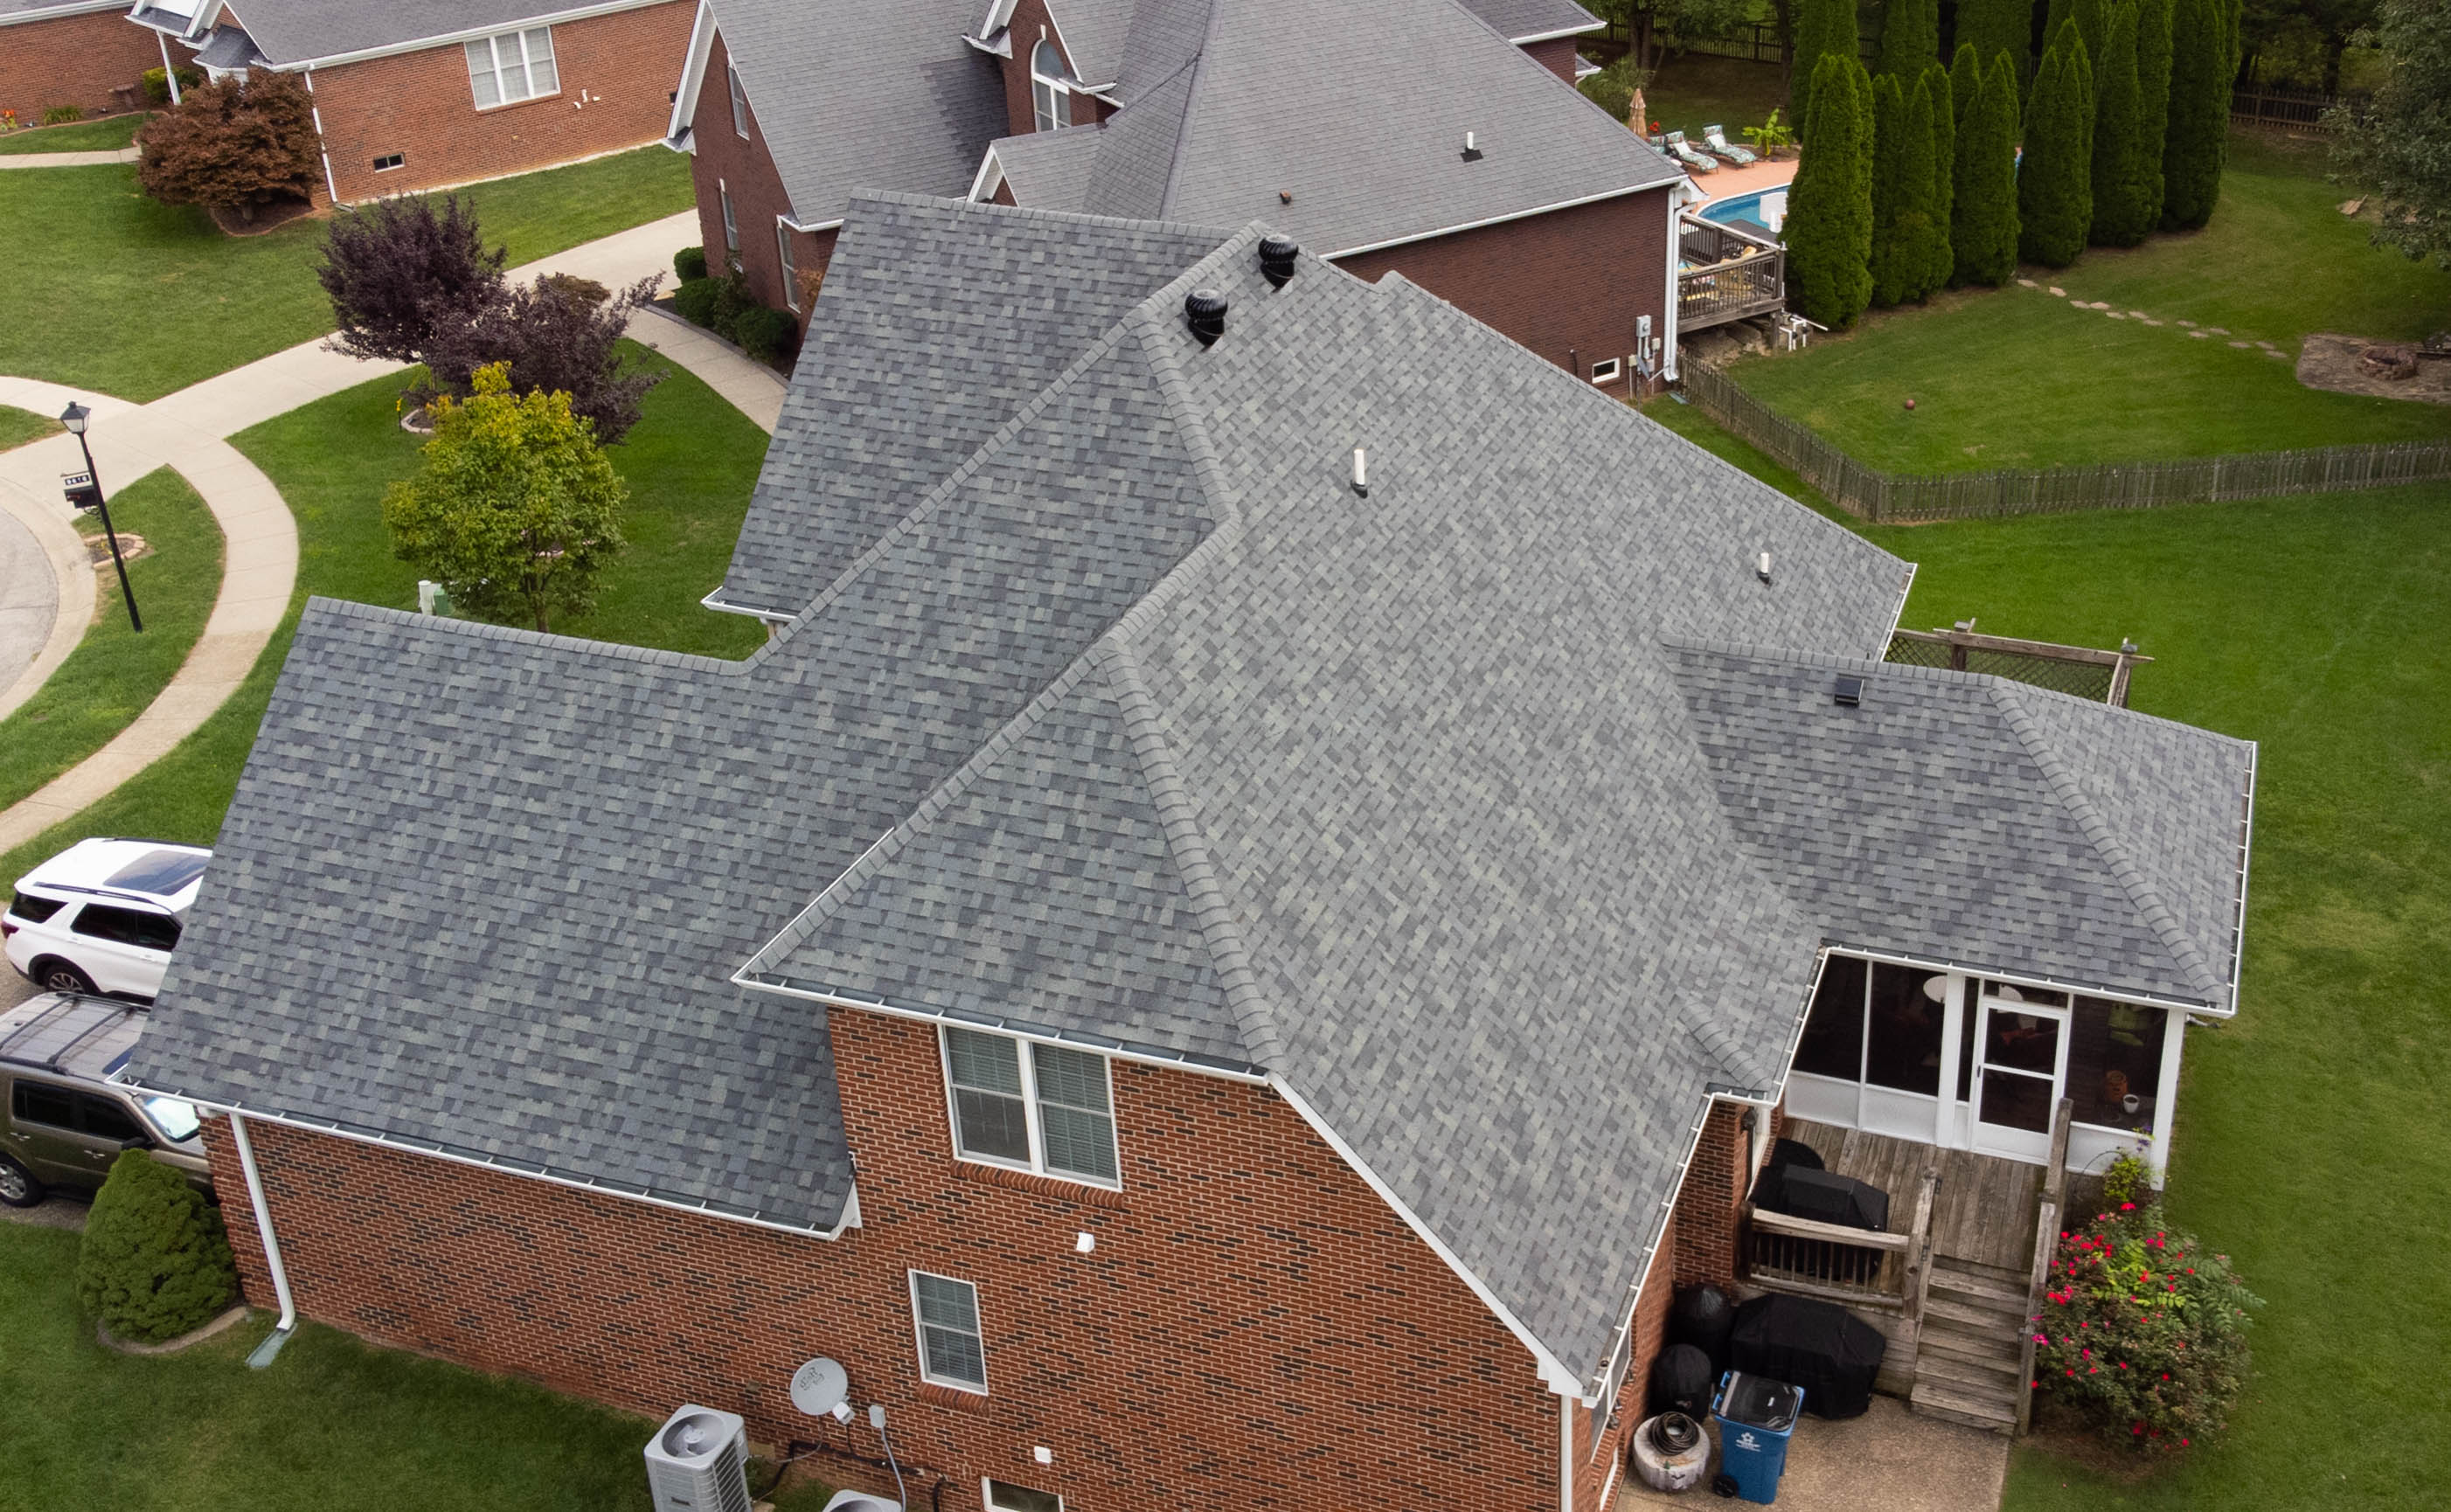 Aerial side view of full roof installation completed by Roof it Right